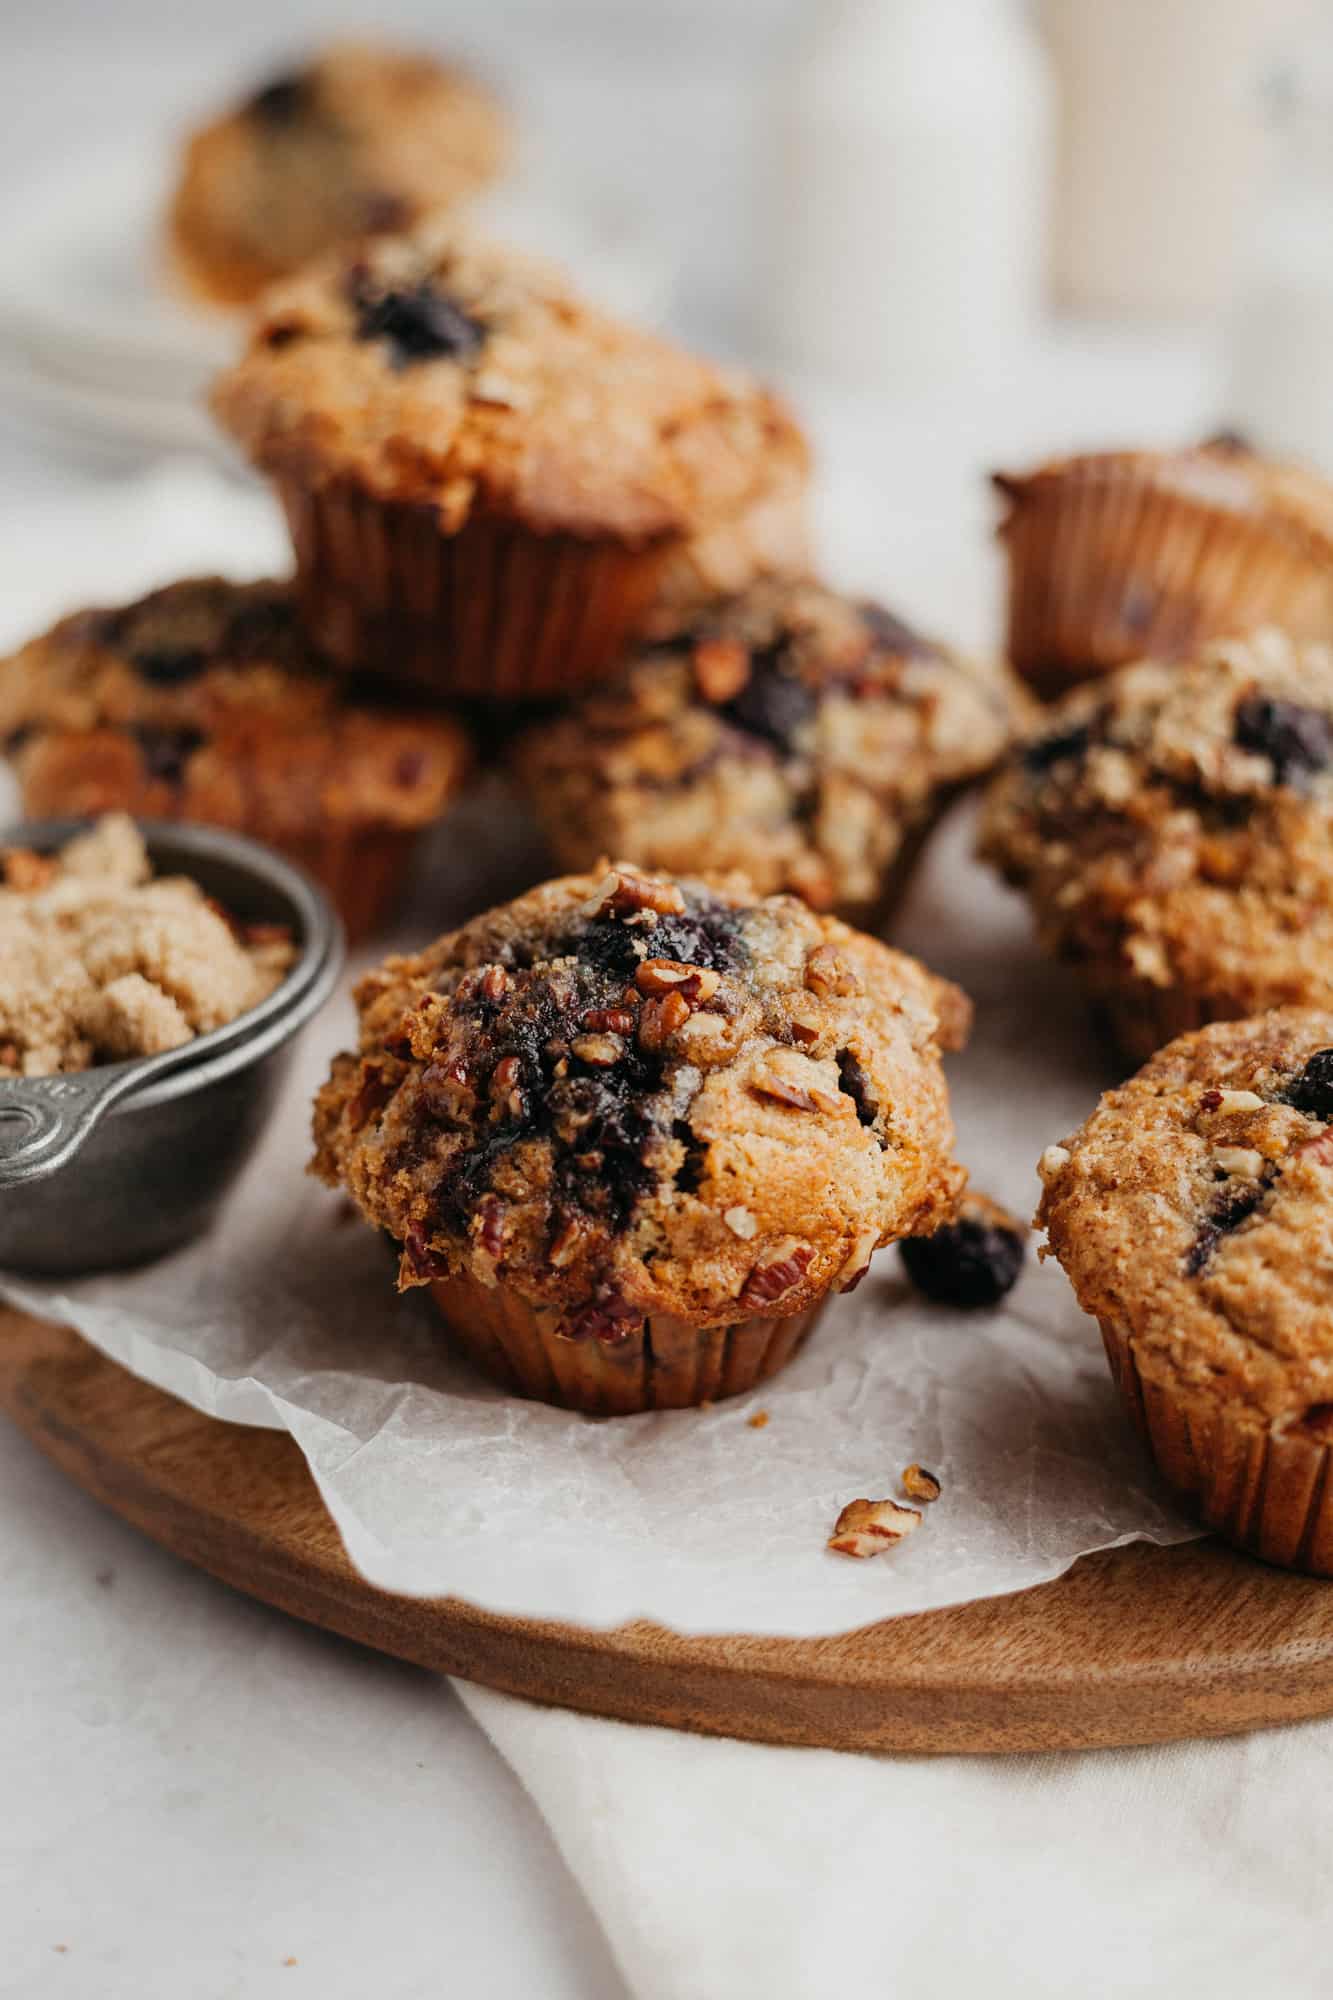 Banana blueberry oatmeal muffins on parchment paper